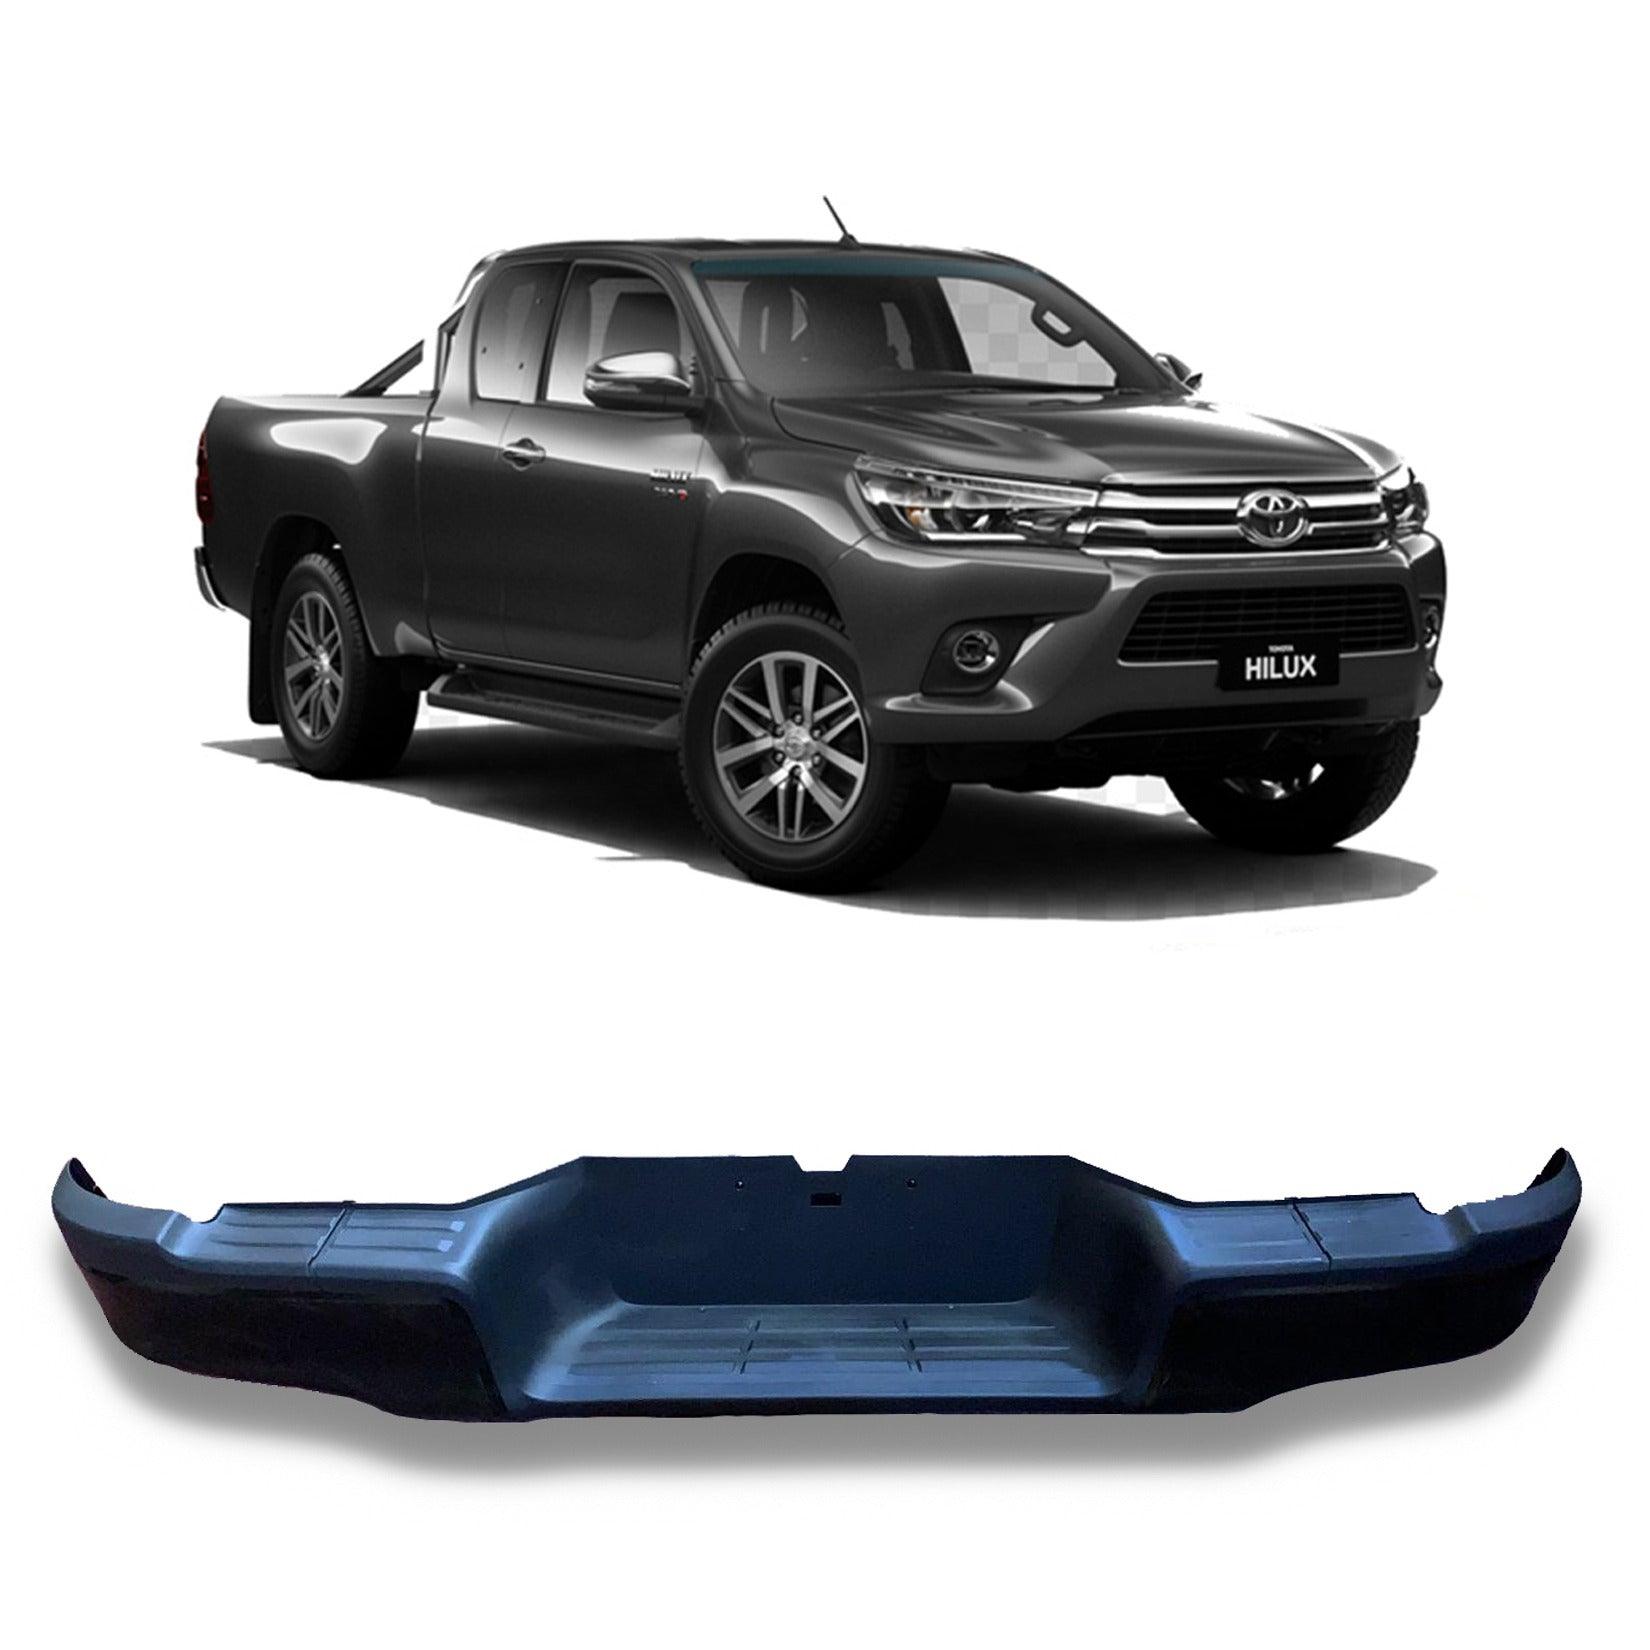 TOYOTA HILUX 2016 ON - REPLACEMENT REAR BUMPER - BLACK - Storm Xccessories2